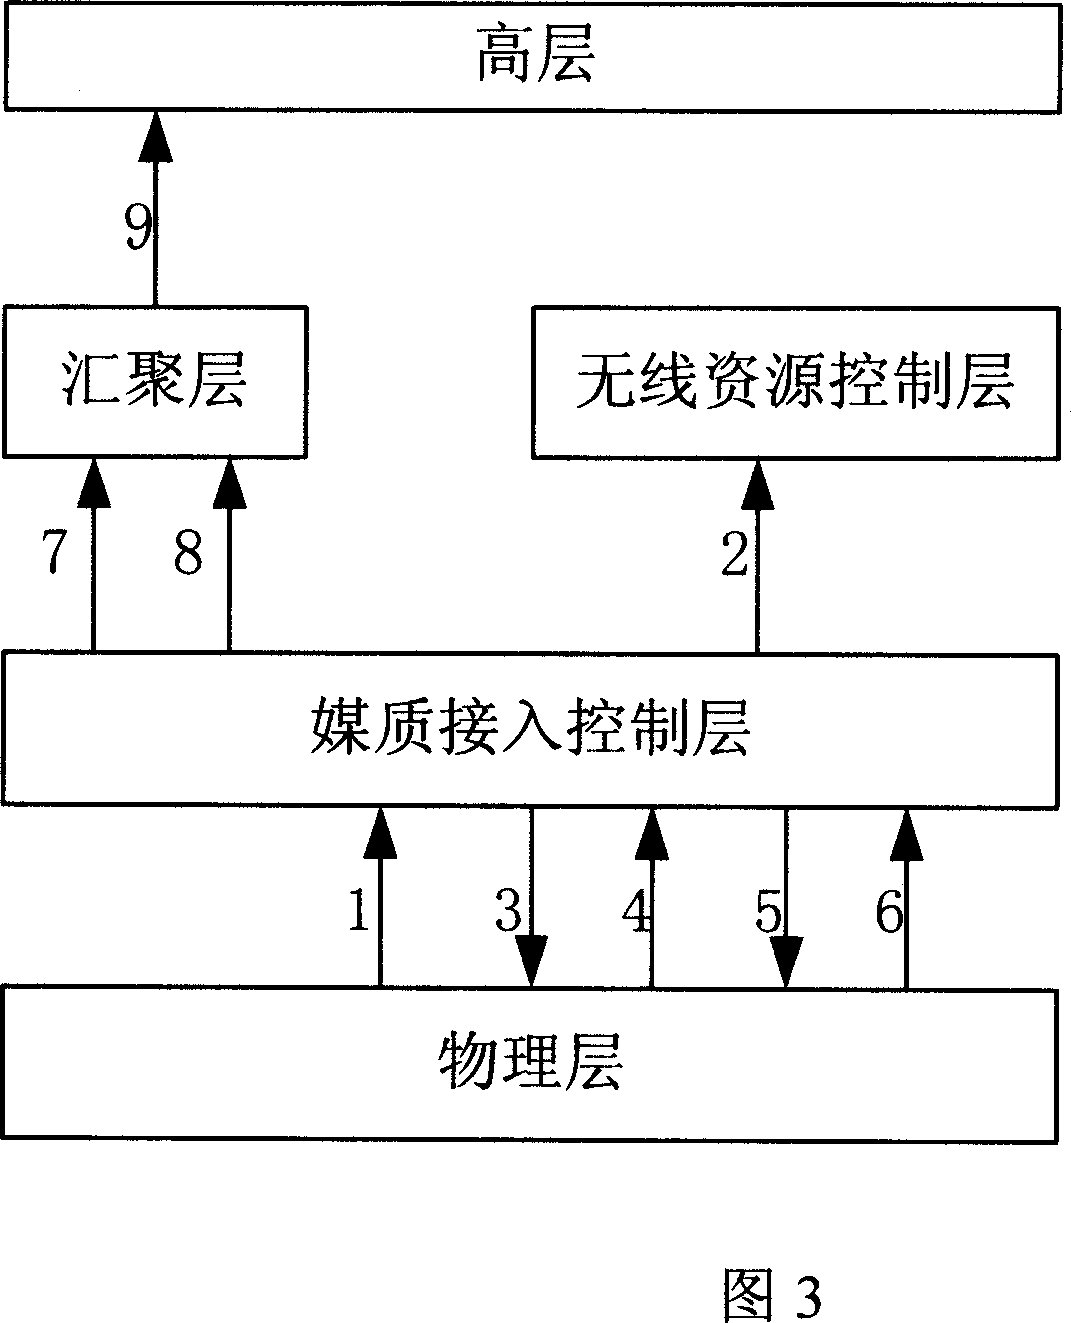 Sending system, method and receiving system for video broadcasting system